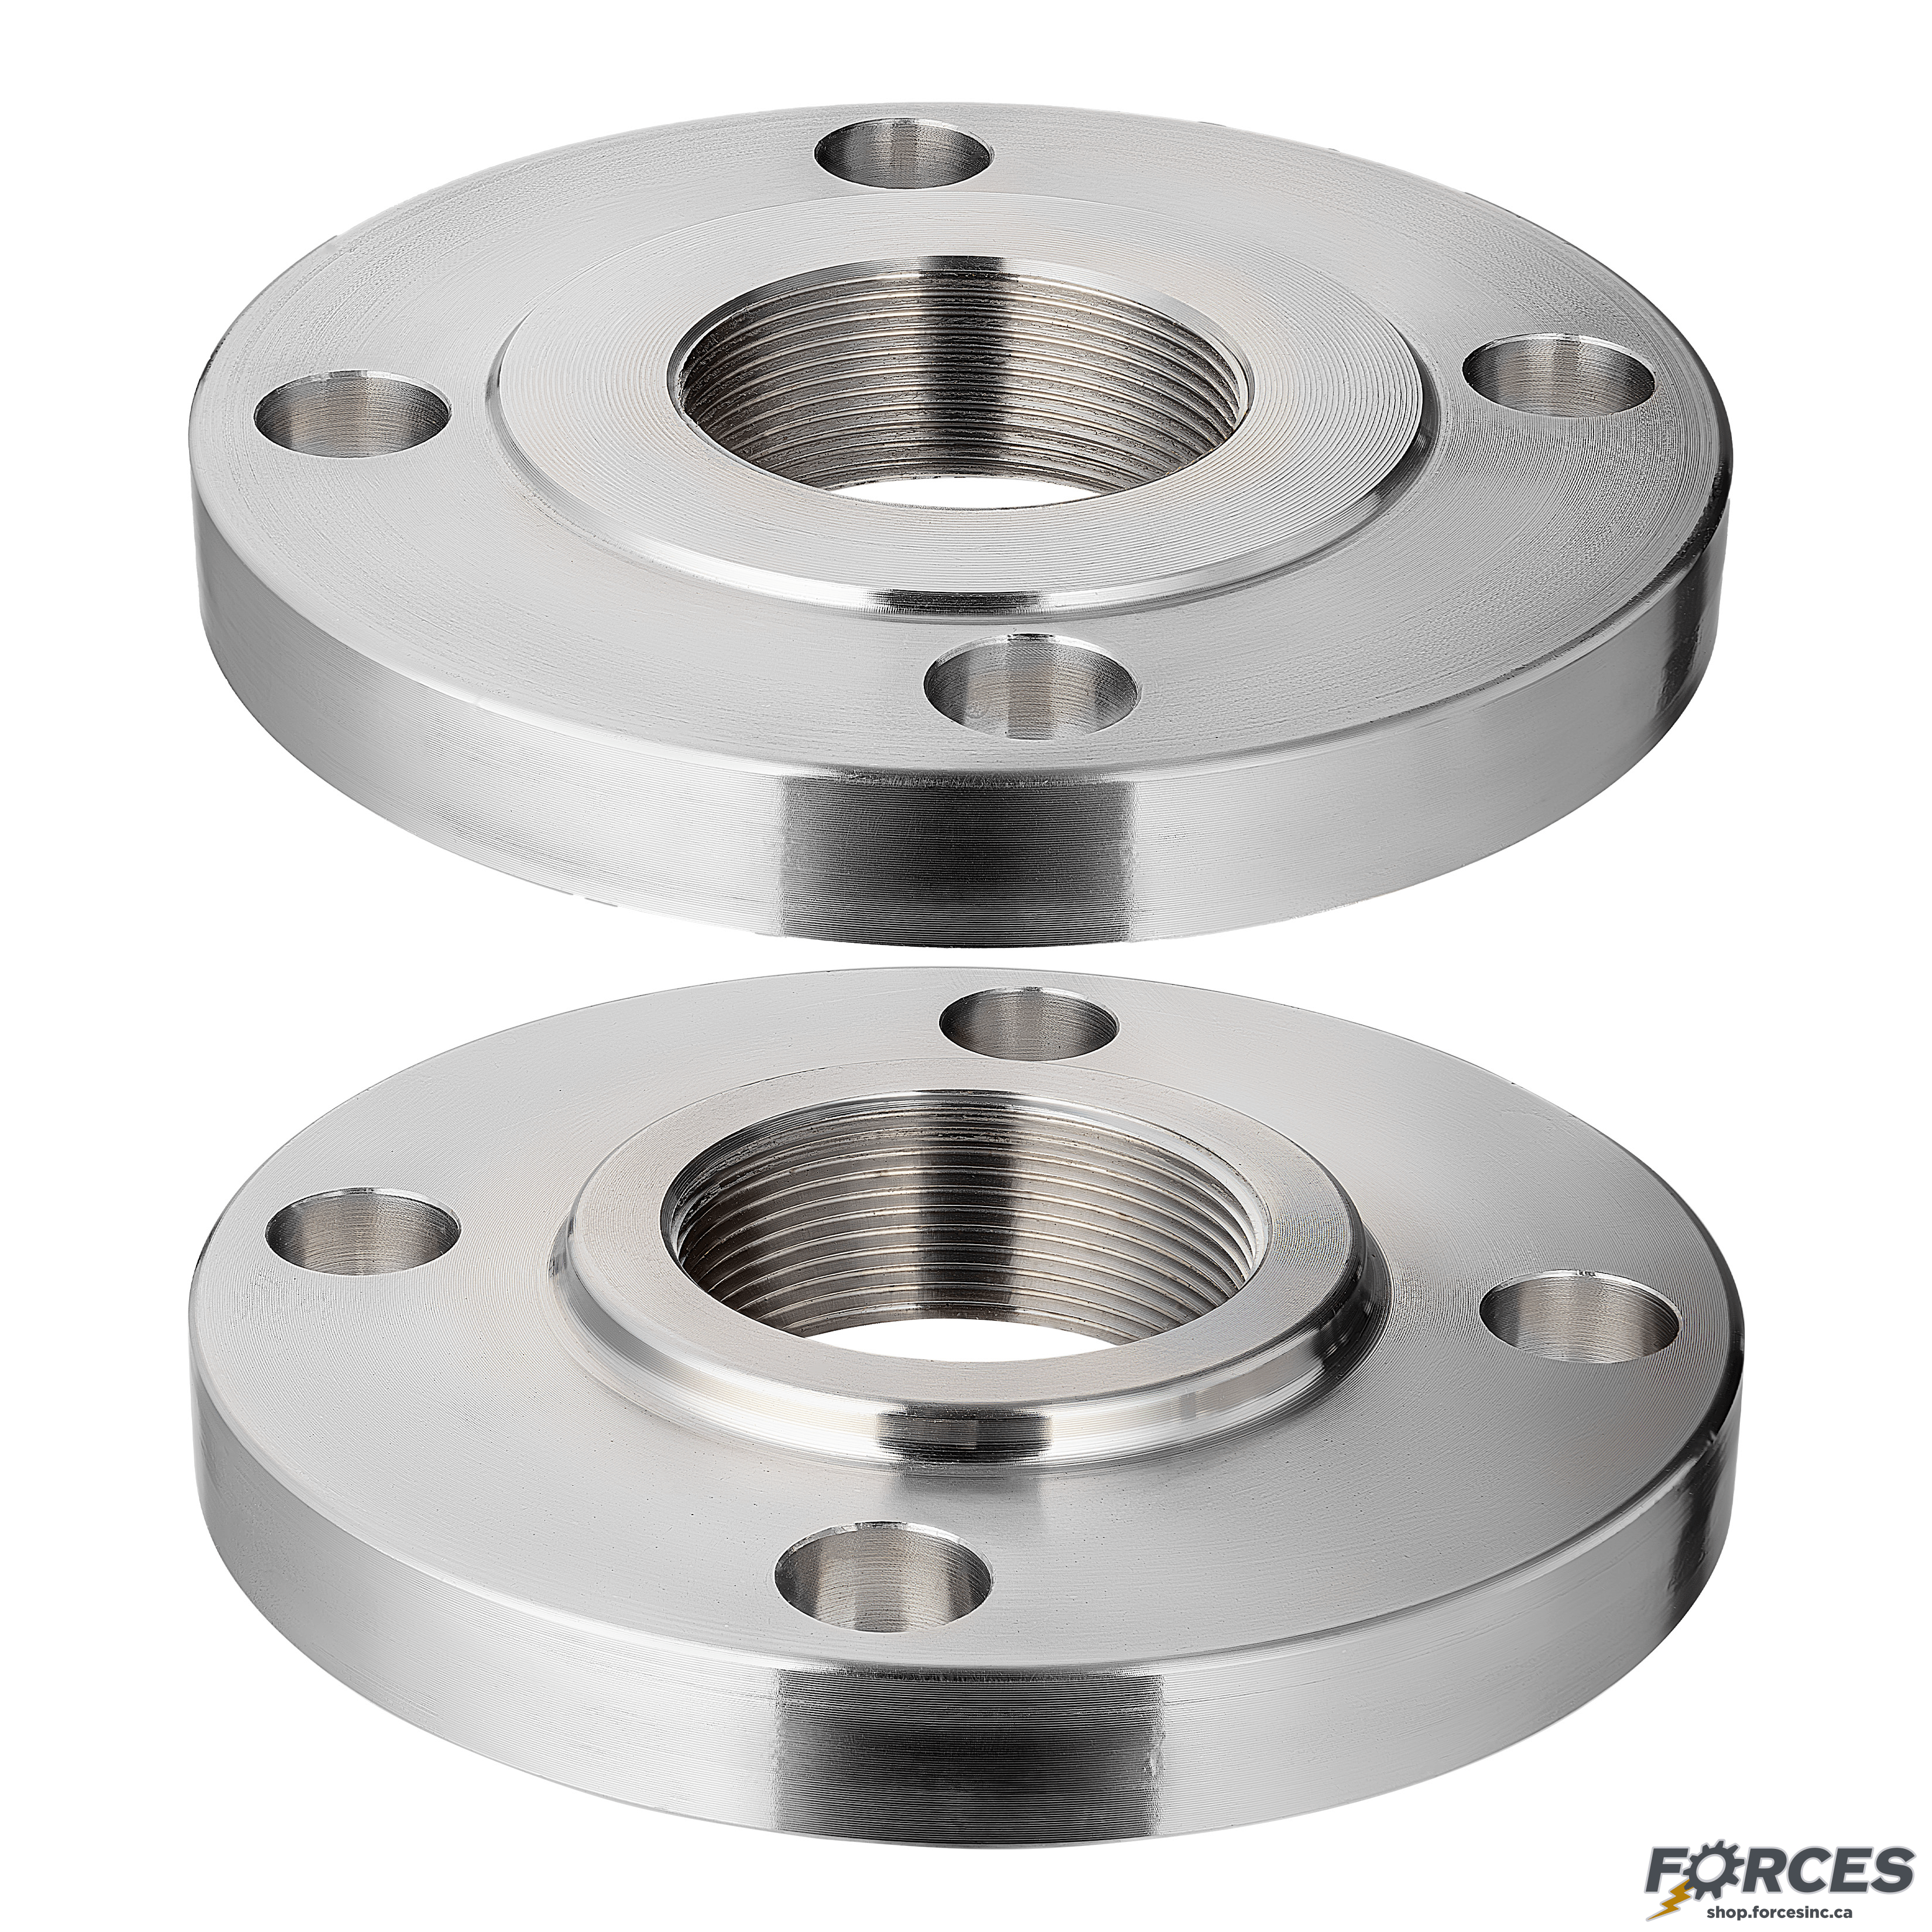 2" Threaded Flange NPT Class #150 - Stainless Steel 304 - Forces Inc